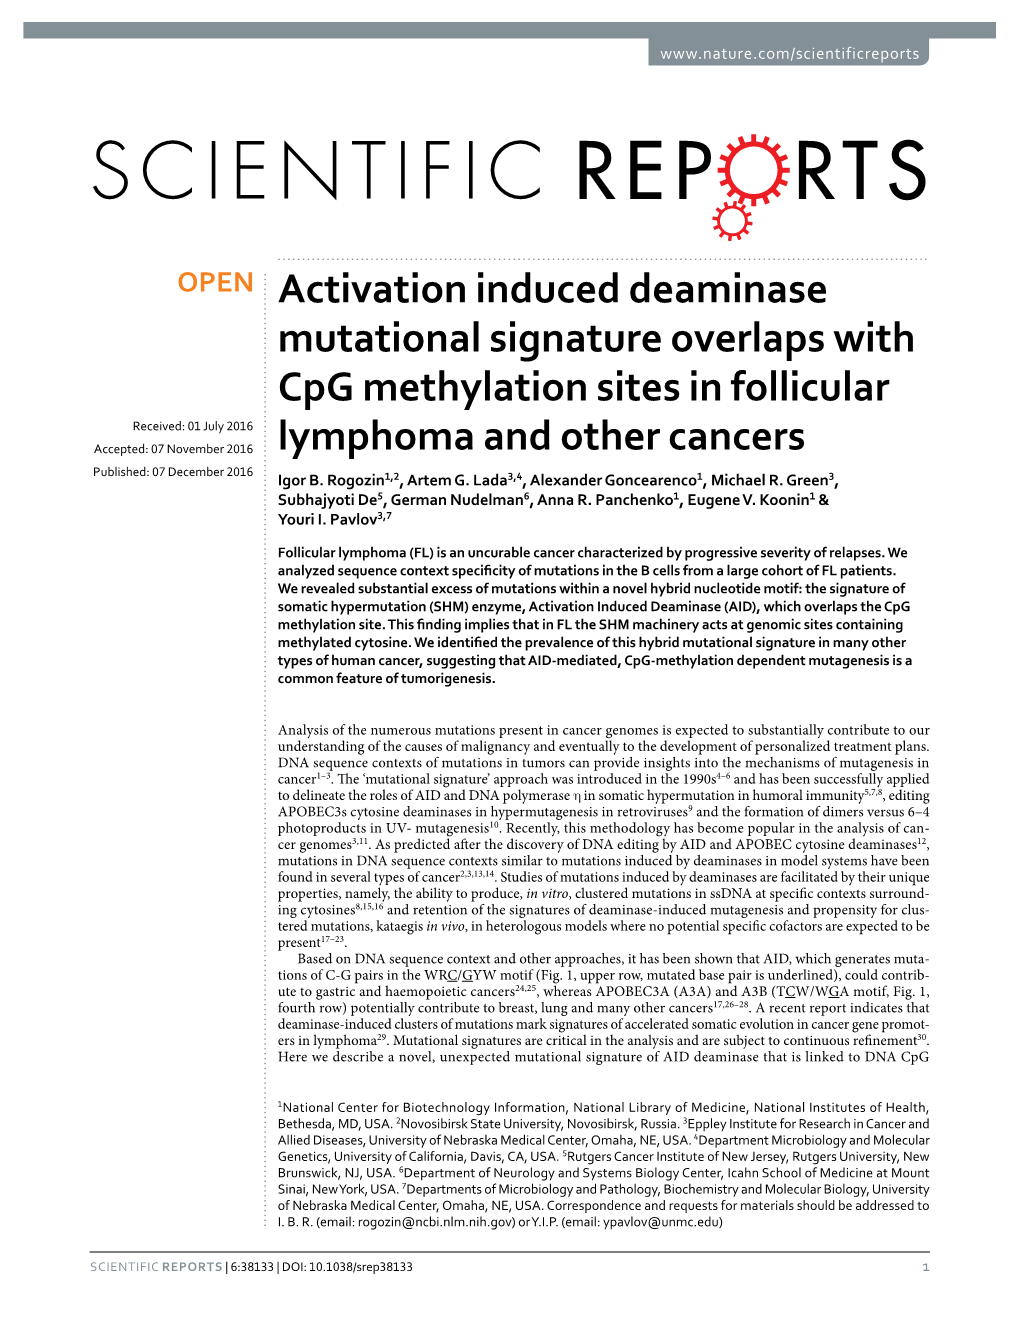 Activation Induced Deaminase Mutational Signature Overlaps With